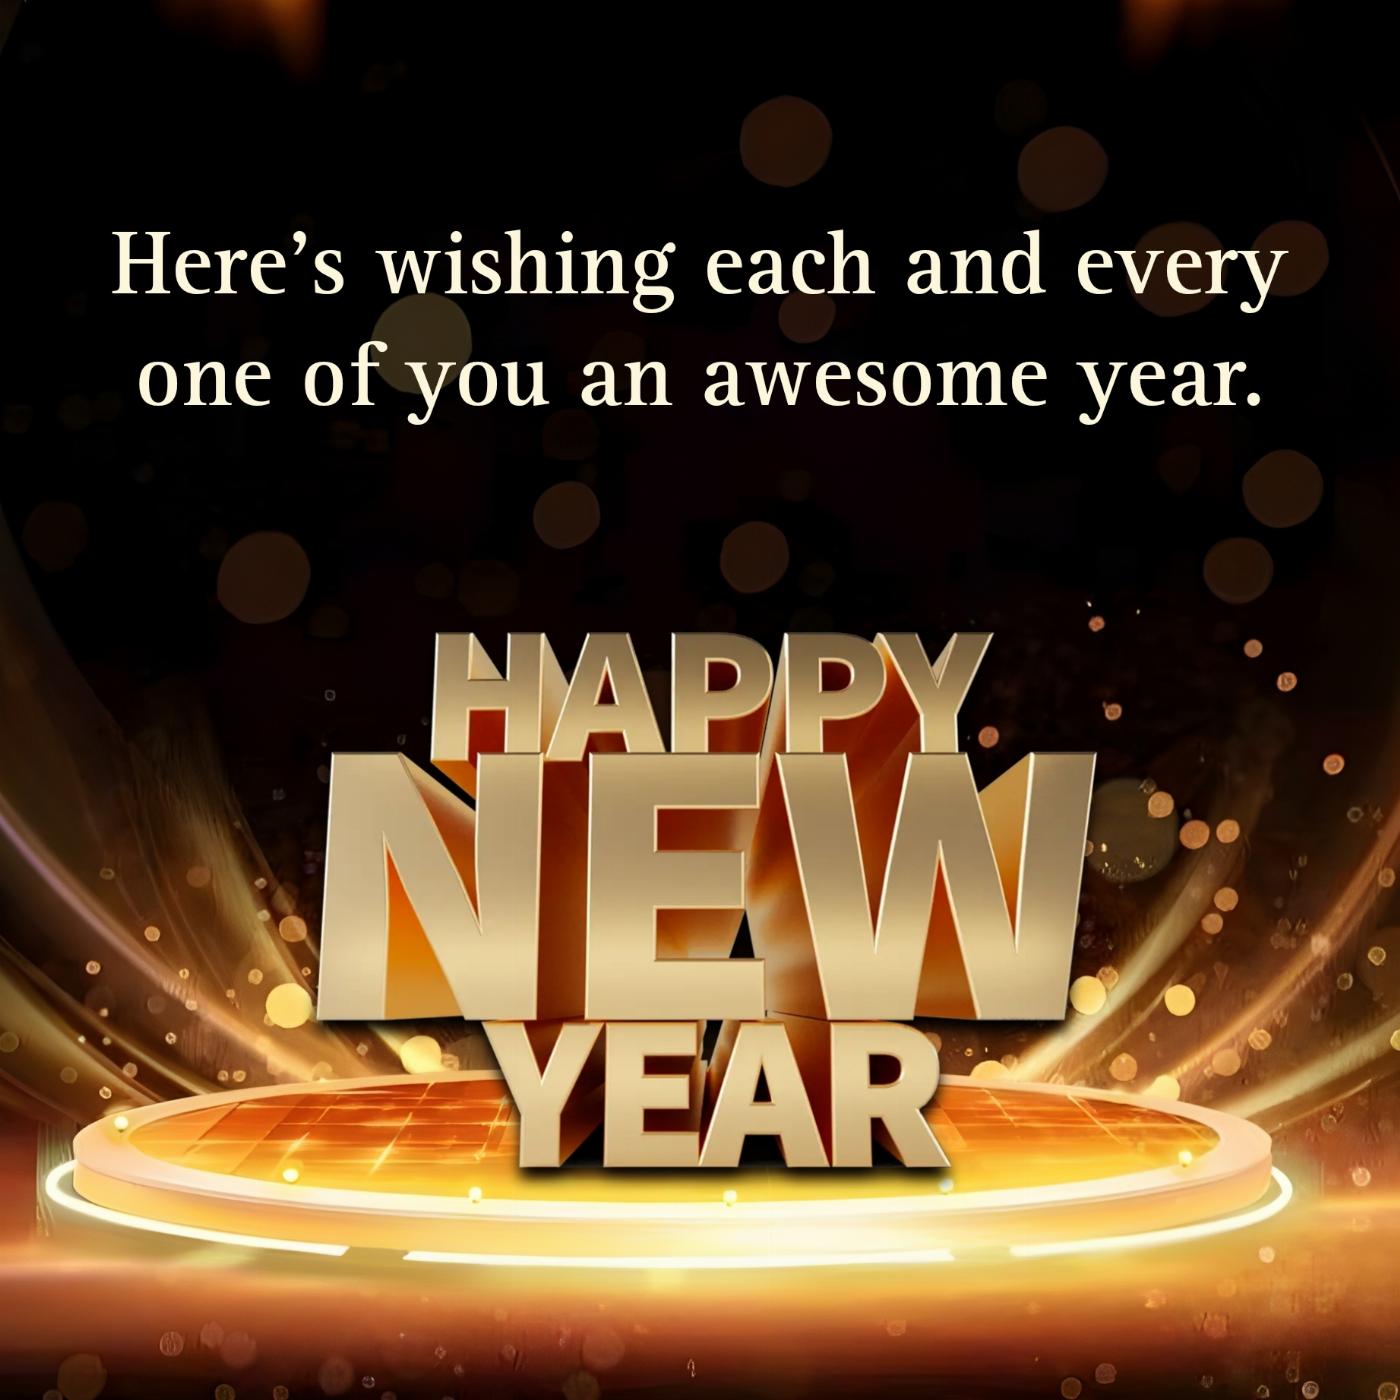 Here's wishing each and every one of you an awesome year